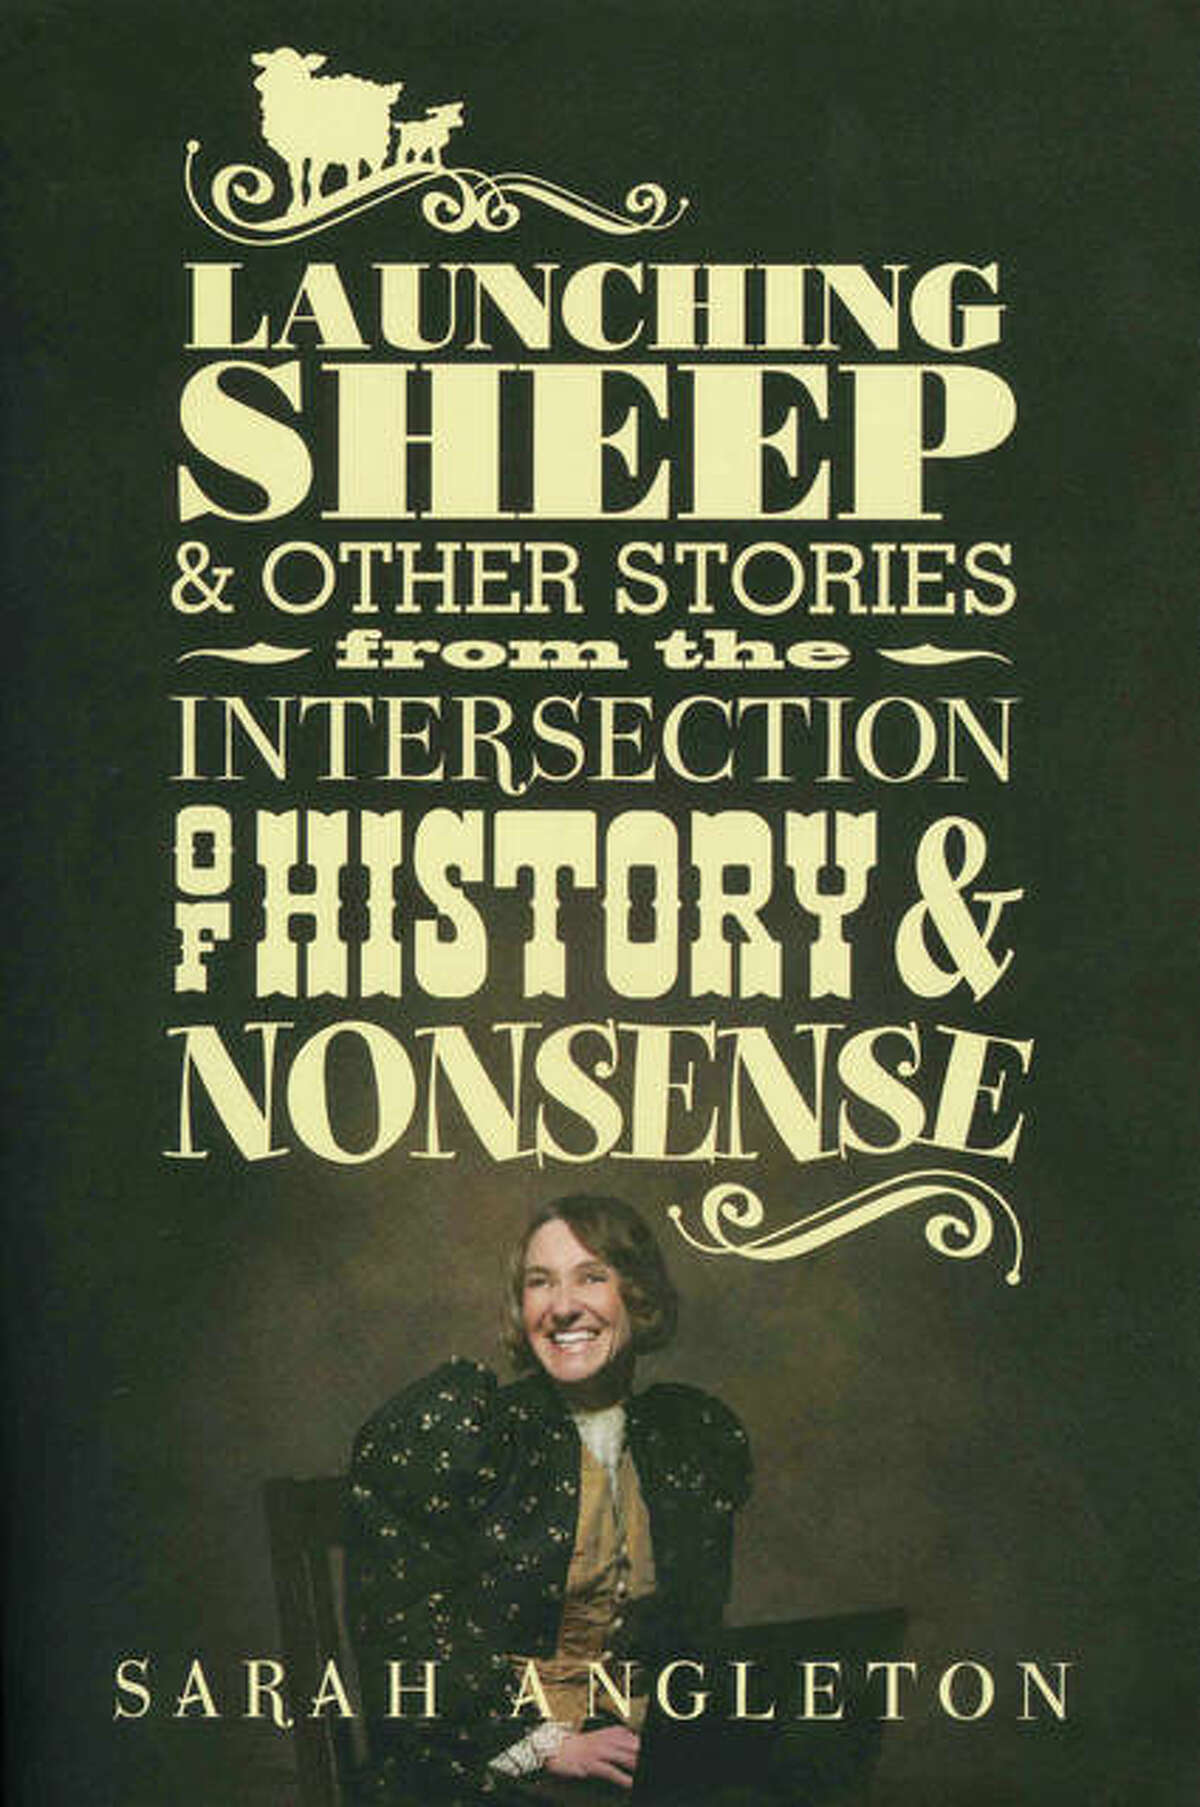 Sarah Angleton admits she used to avoid history as a student. Now she’s written a book, “Launching Sheep and Other Stories from the Intersection of History and Nonsense,” filled with essays about some of the more humorous moments in time.